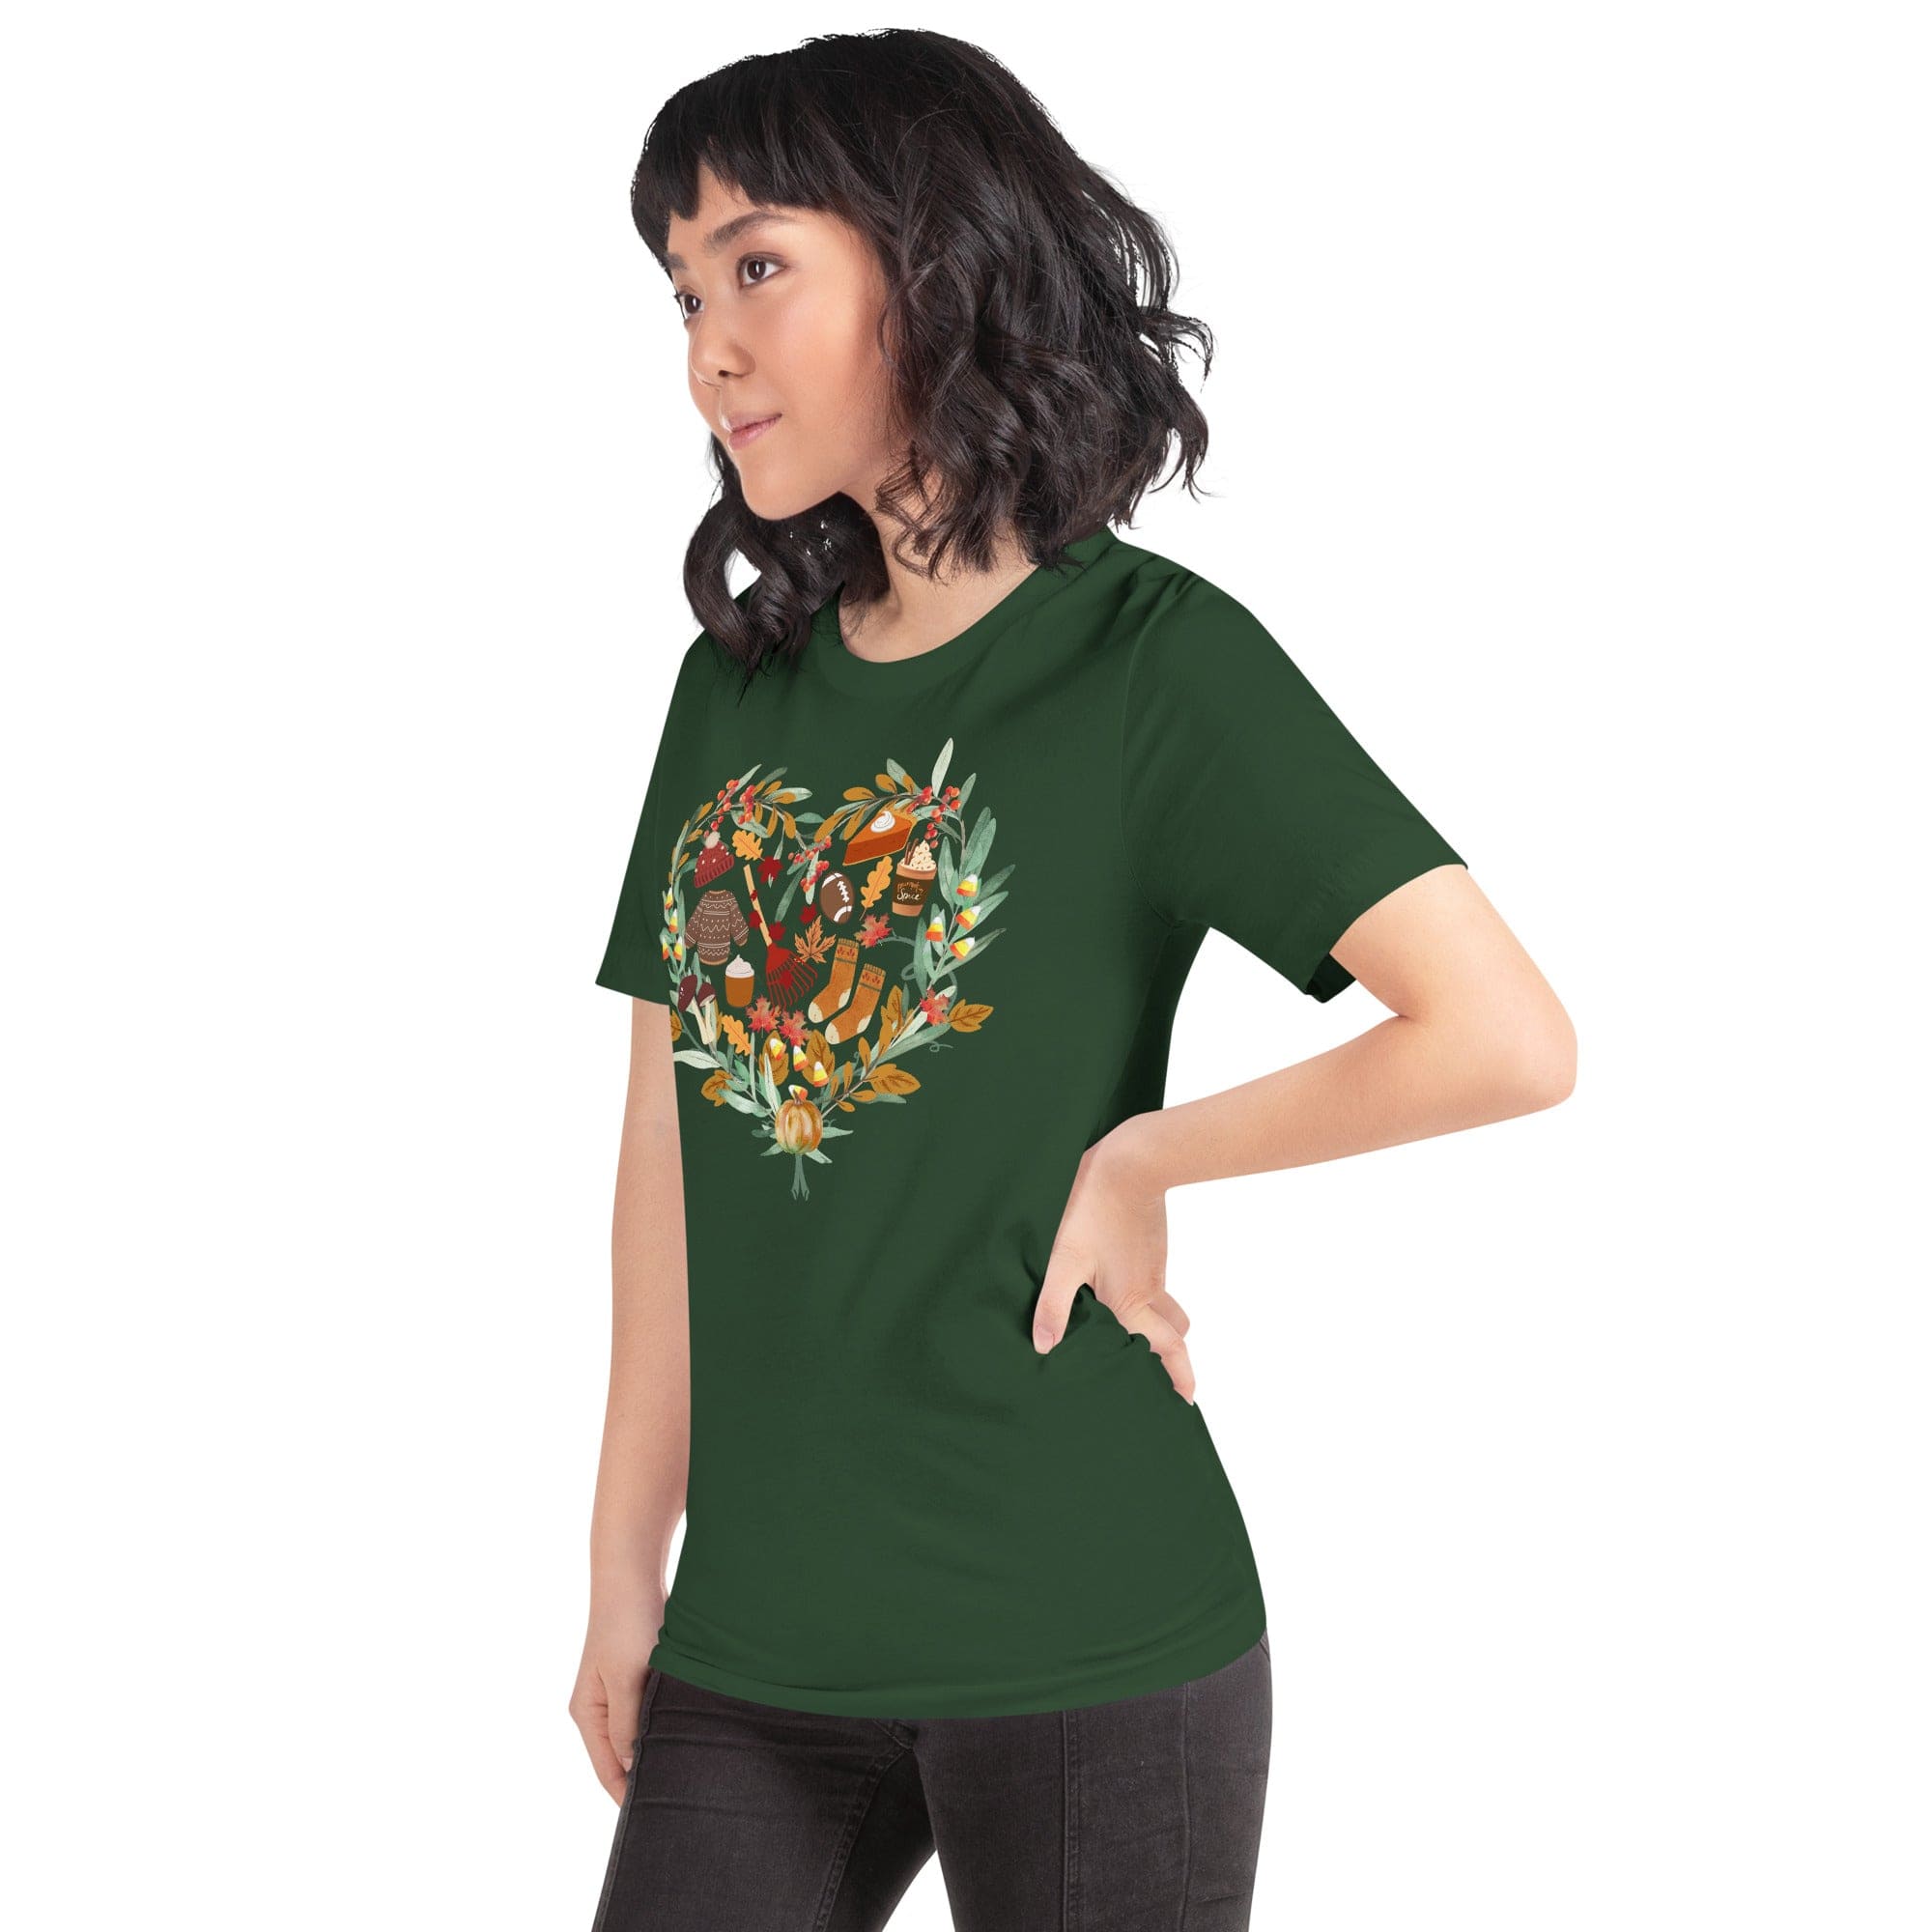 Spruced Roost T-Shirts Autumn Medley T-Shirt Crew Neck - XS-3XL